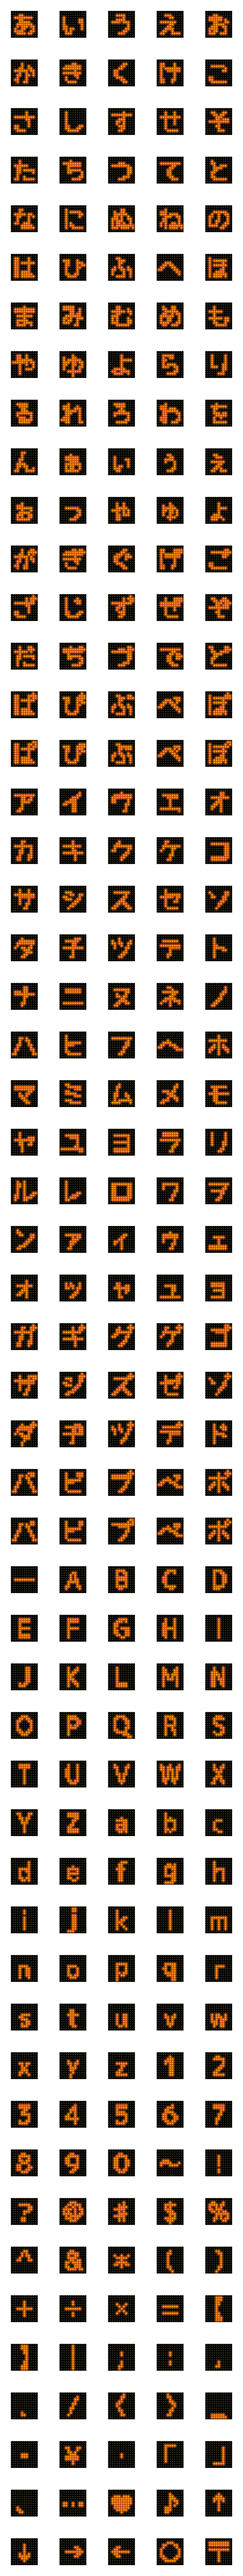 [LINE絵文字]LED 掲示板 絵文字 デコ文字 電車の画像一覧